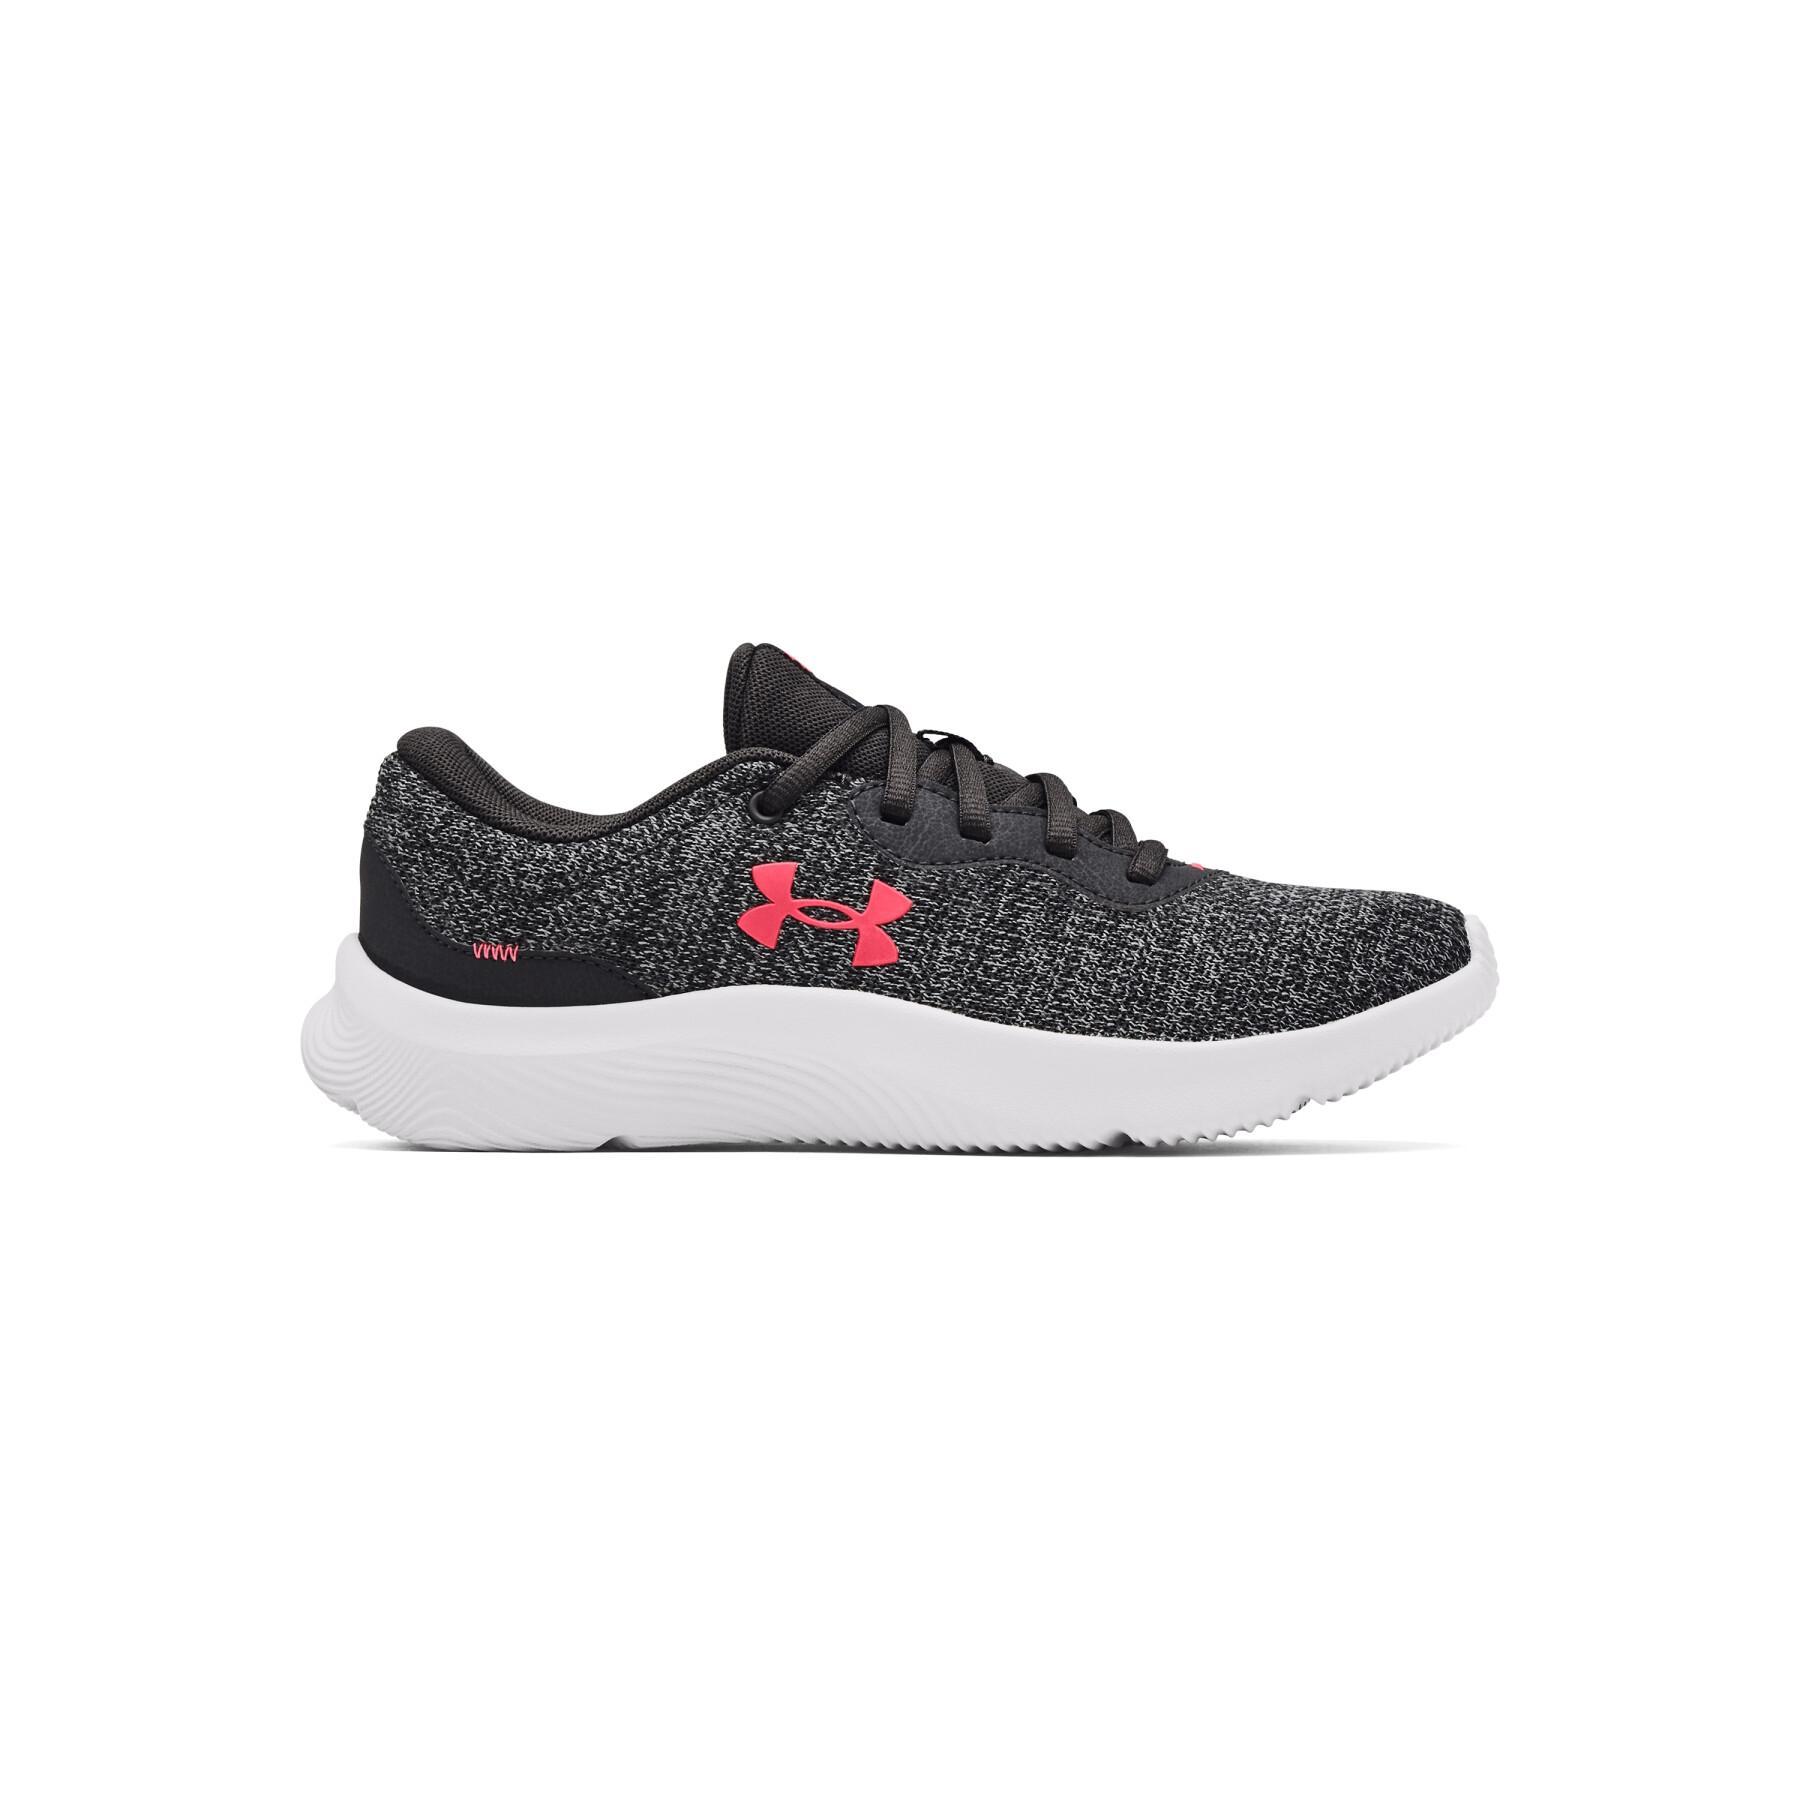 Women's running shoes Under Armour Mojo 2